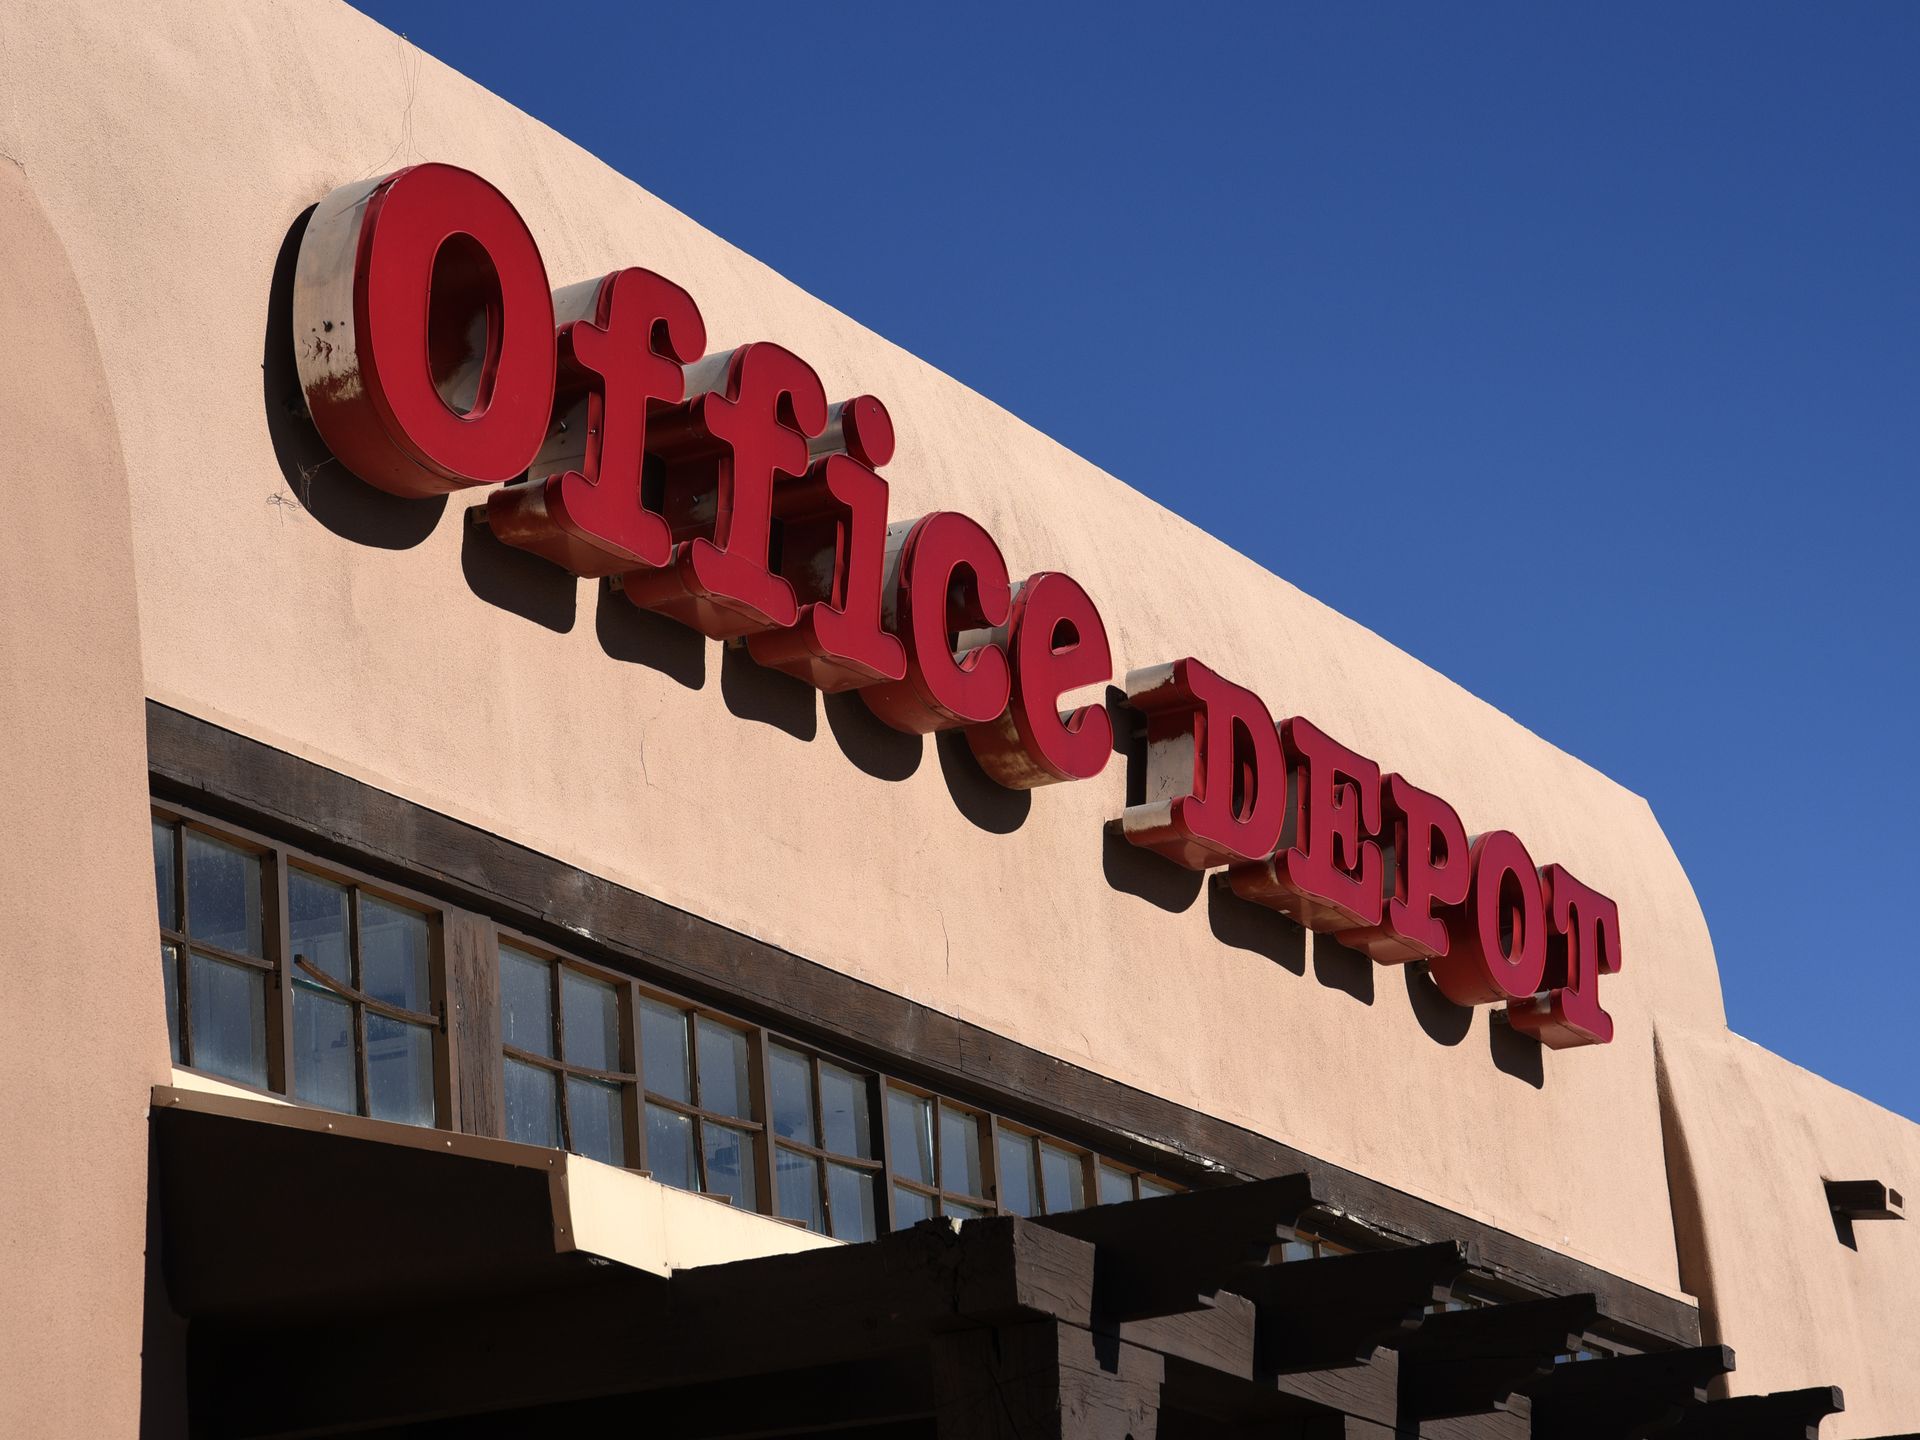 Office Depot - Find a Store